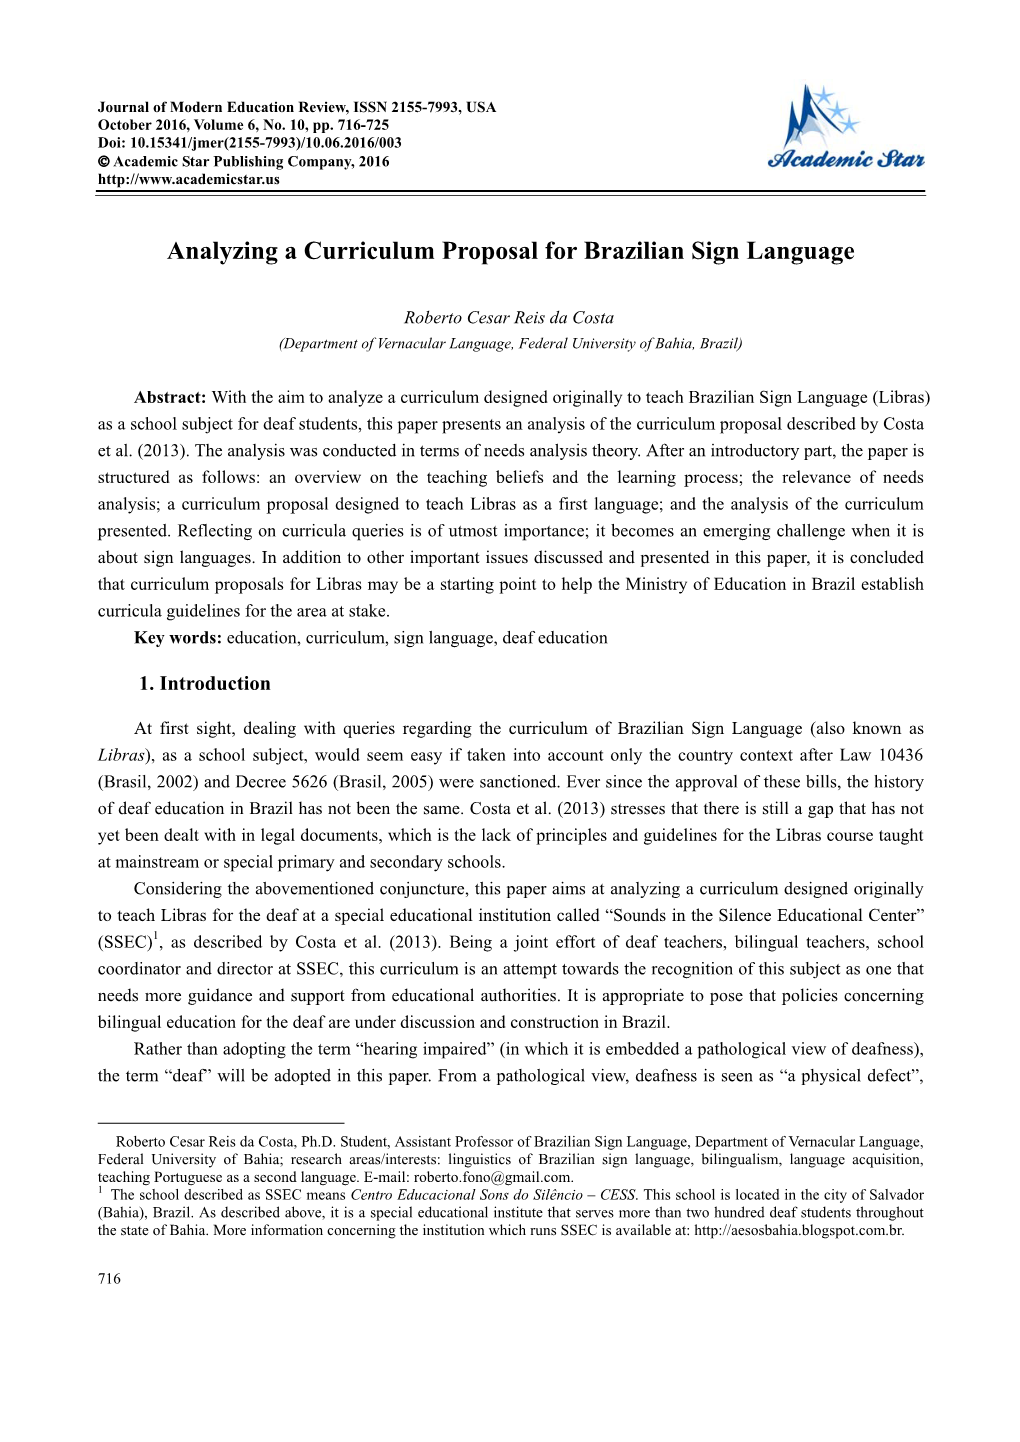 Analyzing a Curriculum Proposal for Brazilian Sign Language